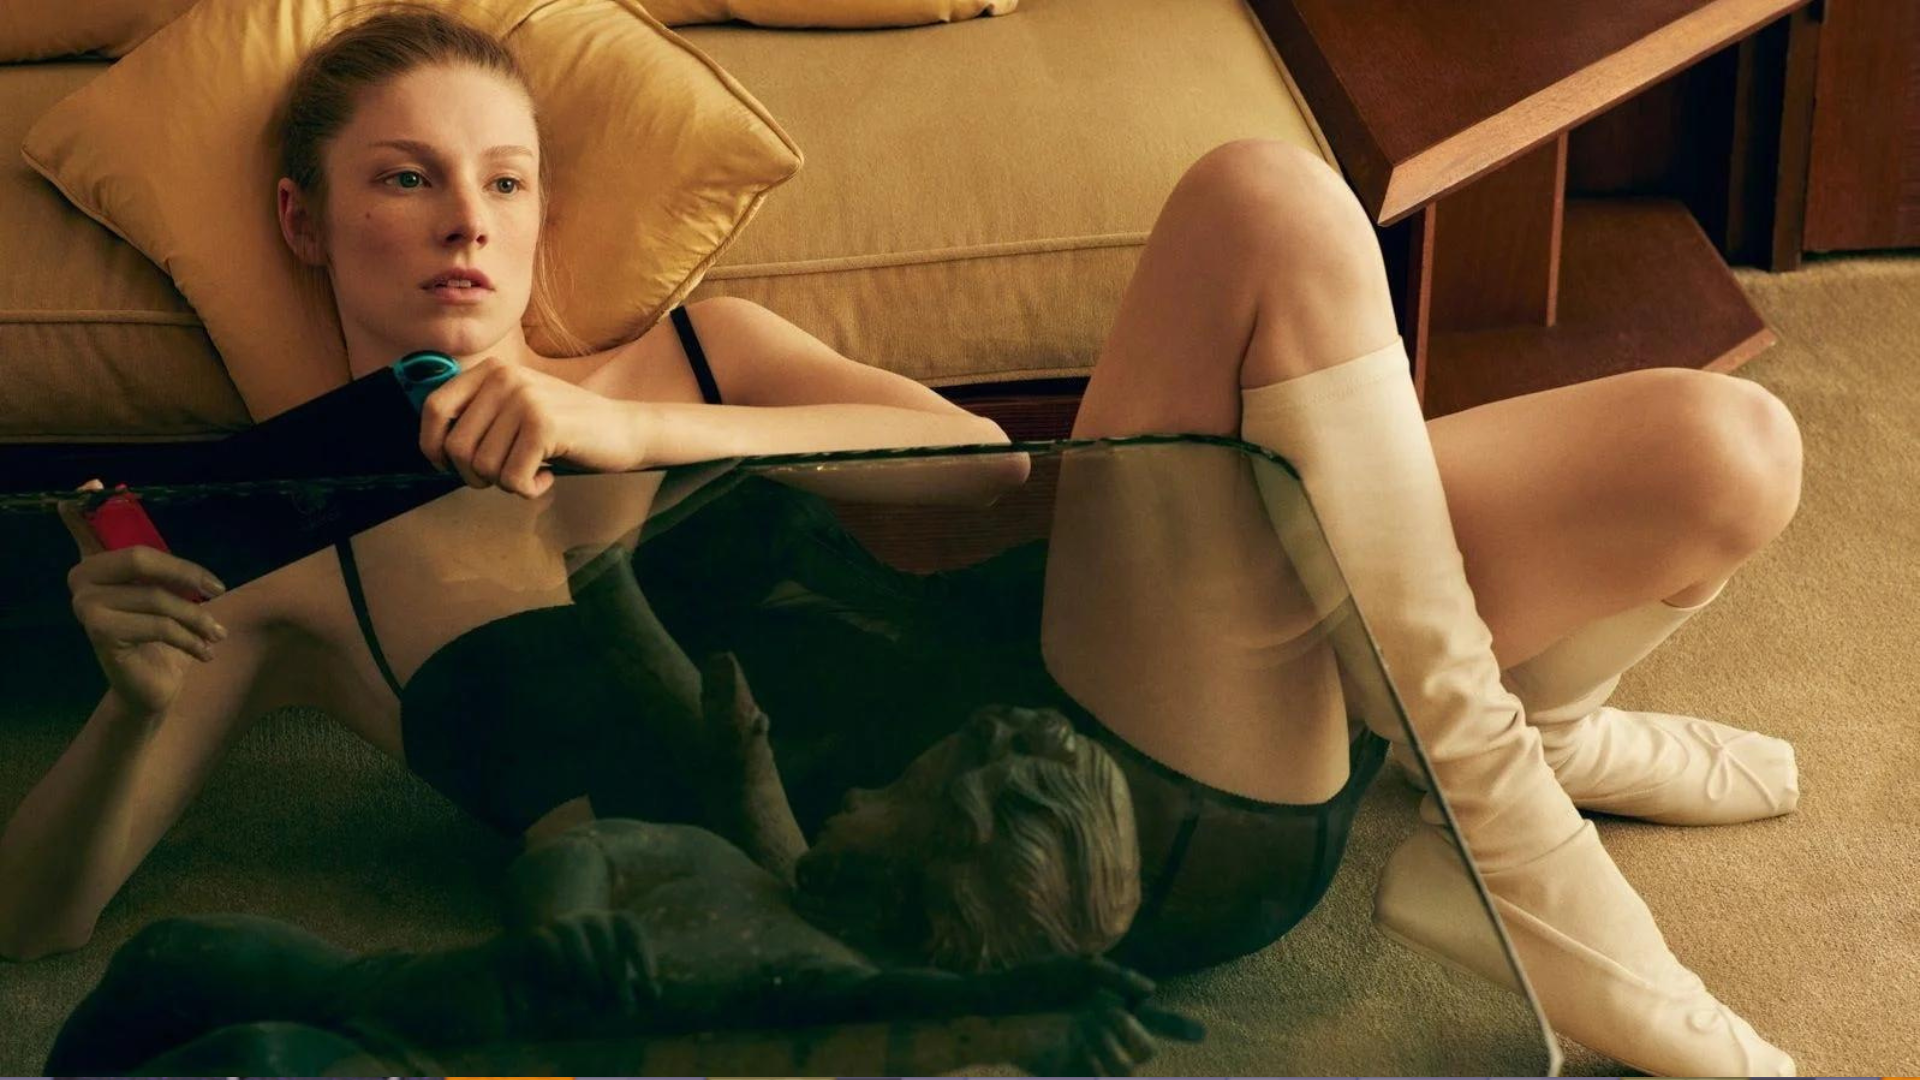 Hunter Schafer lounges on the floor next to a coffee table and couch, her head propped up on a pillow, wearing a black dress and high white boots in a shoot for Vogue Magazine.